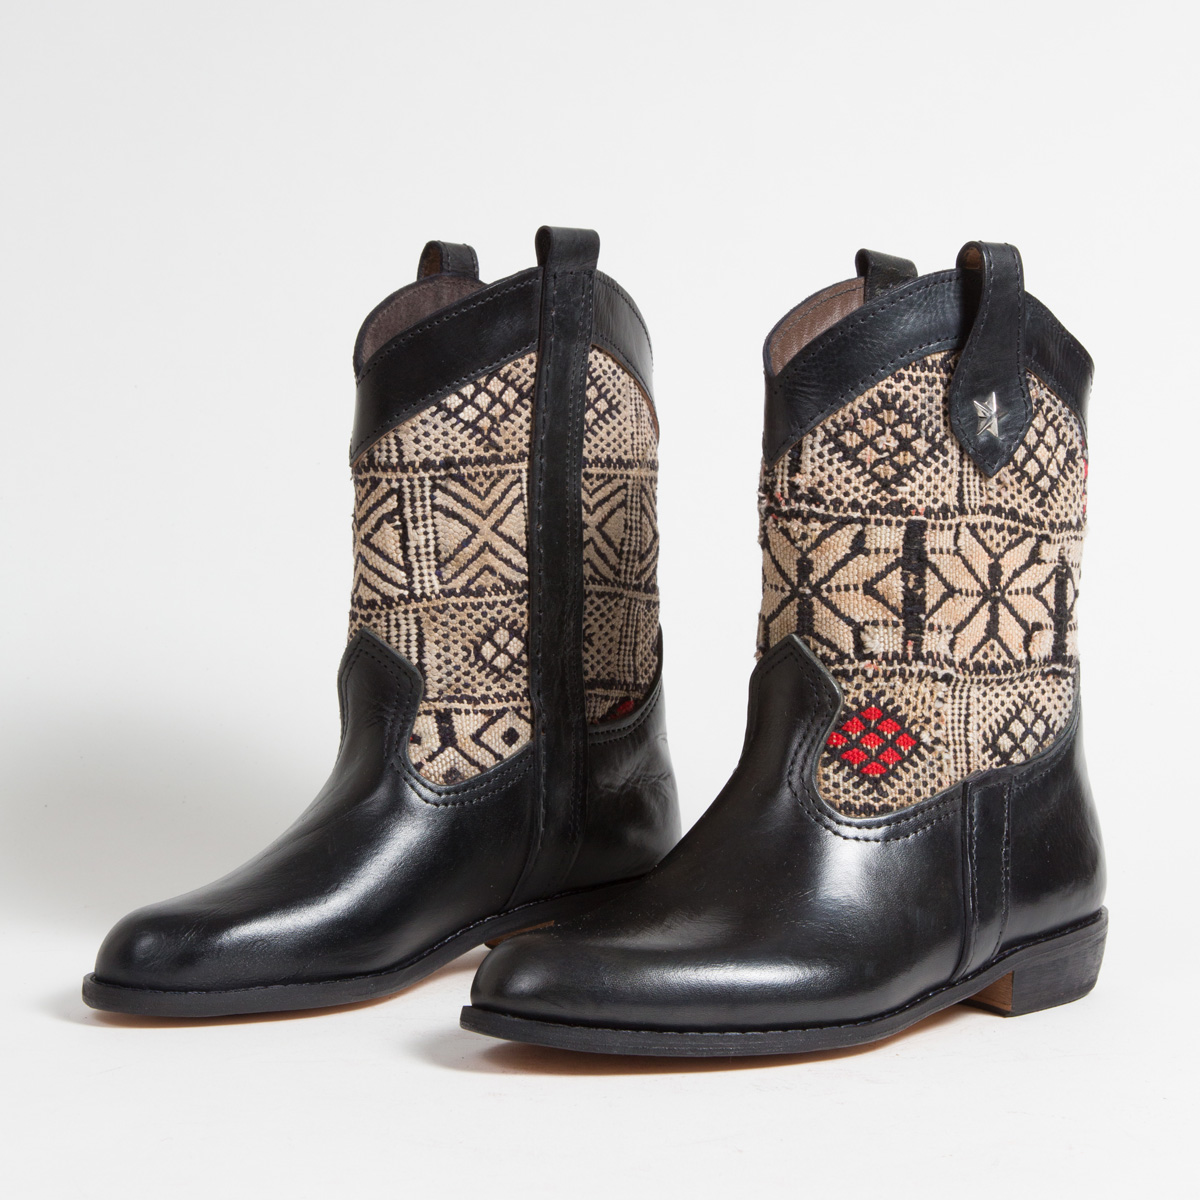 Bottines Kilim cuir mababouche artisanales (Réf. MN10-39)